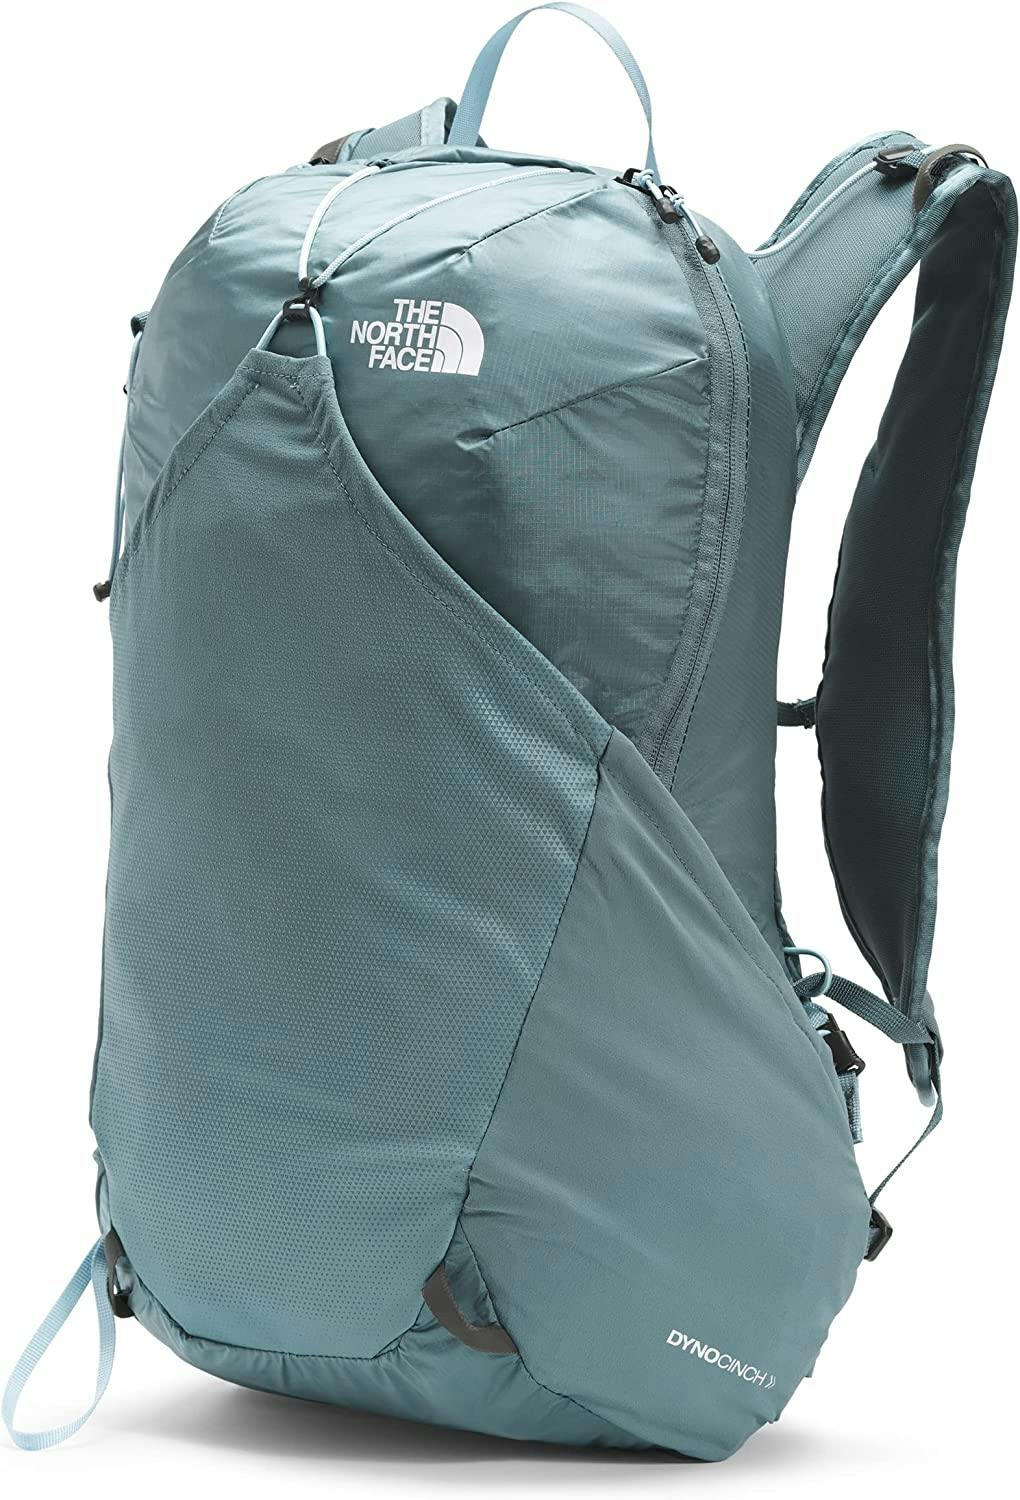 The North Face Chimera 18 Backpack